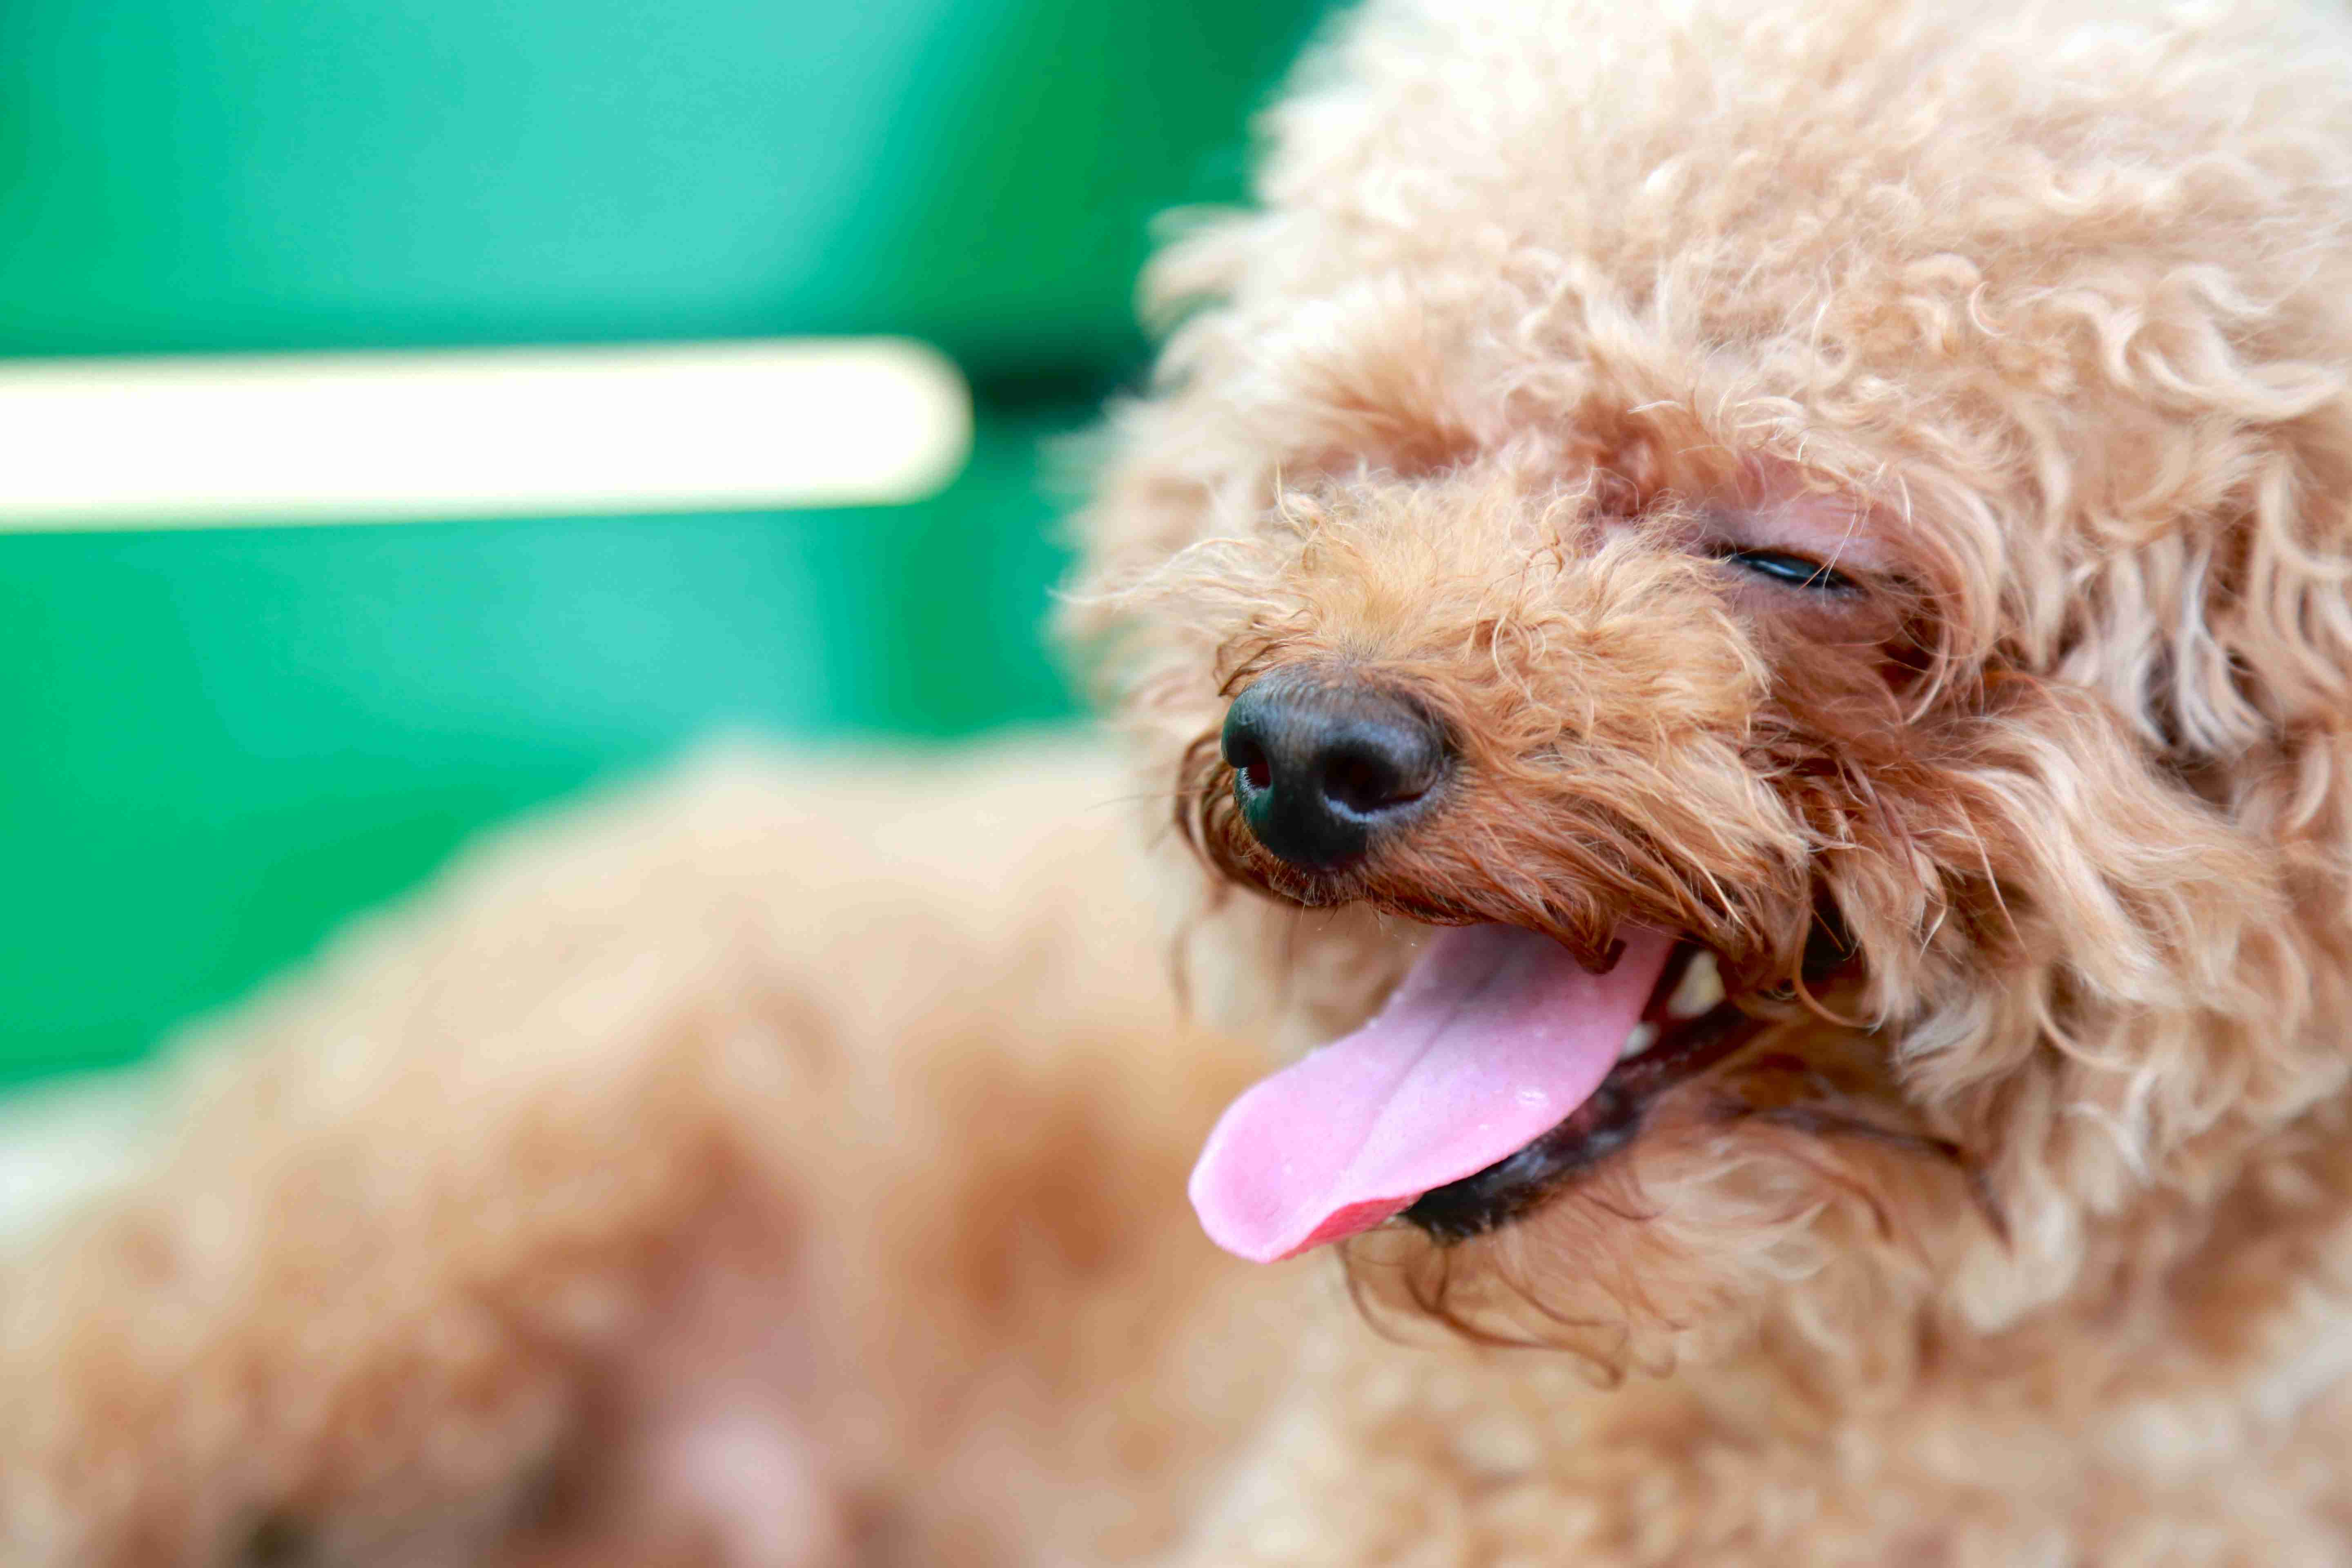 Did you encounter any difficulties with introducing your Poodle puppy to car rides or traveling?